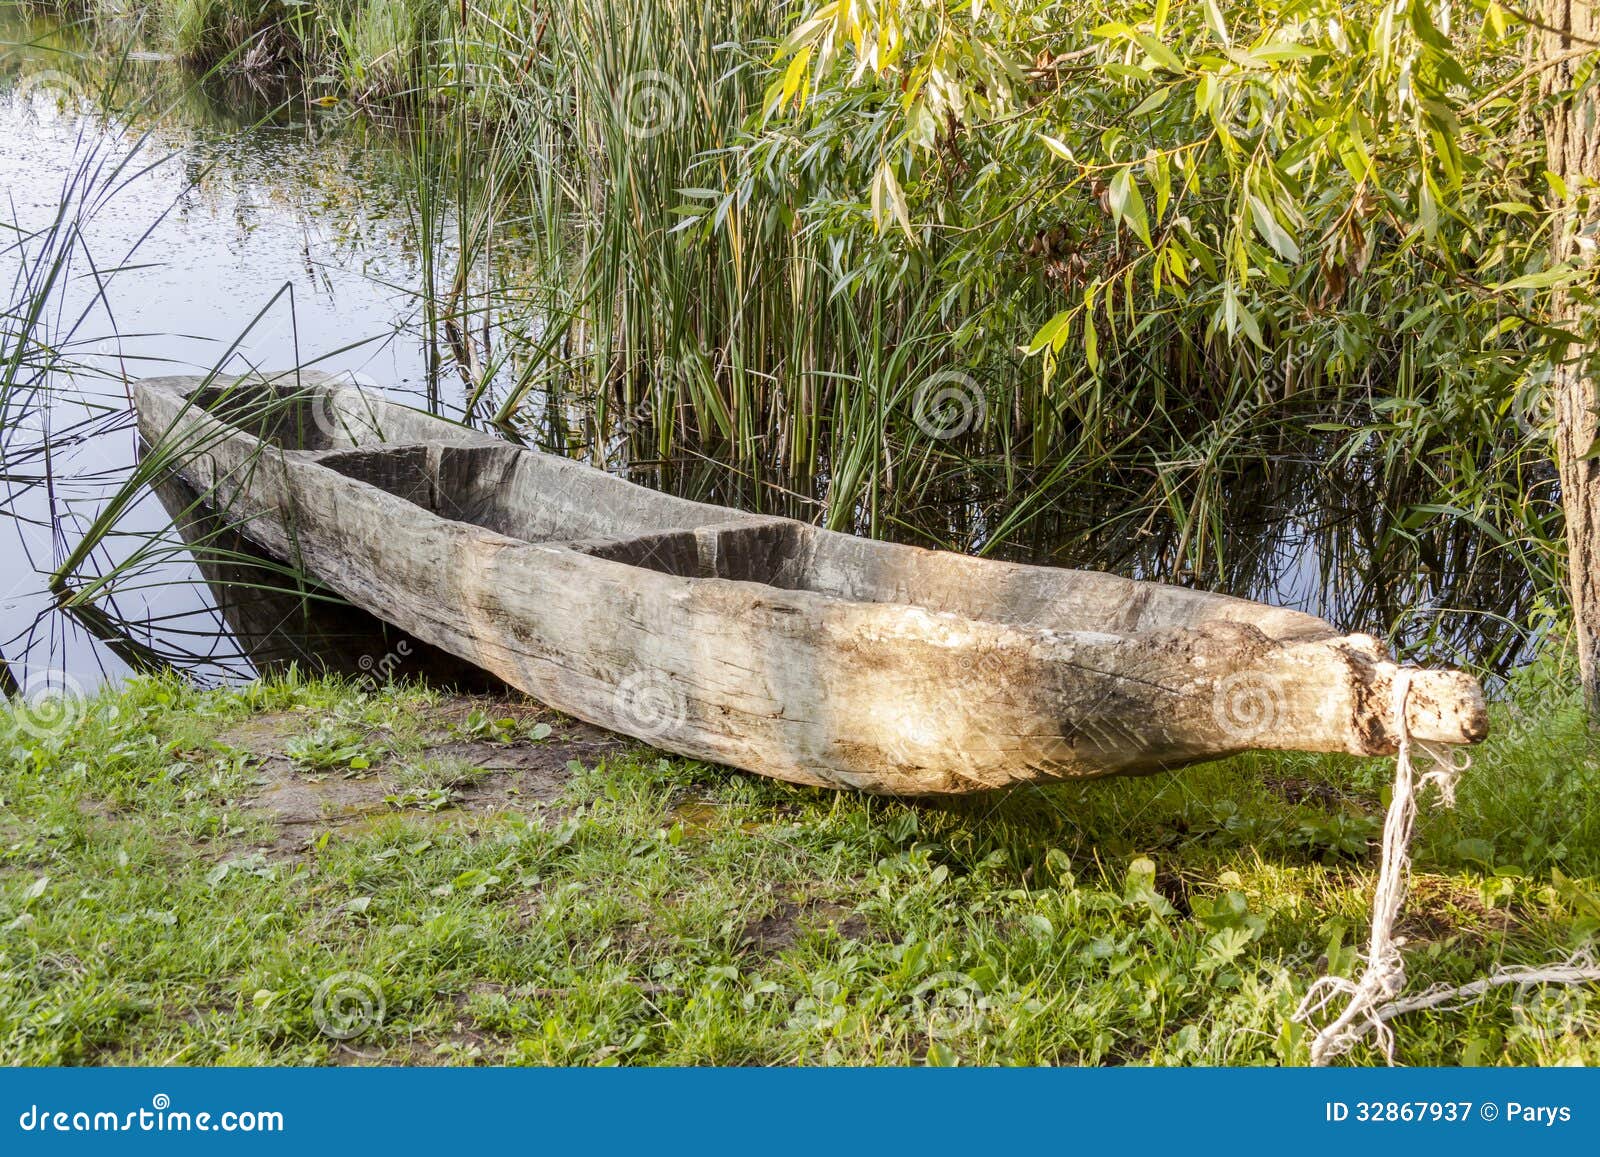 Old Wooden Canoe In Biskupin Museum - Poland. Royalty Free 